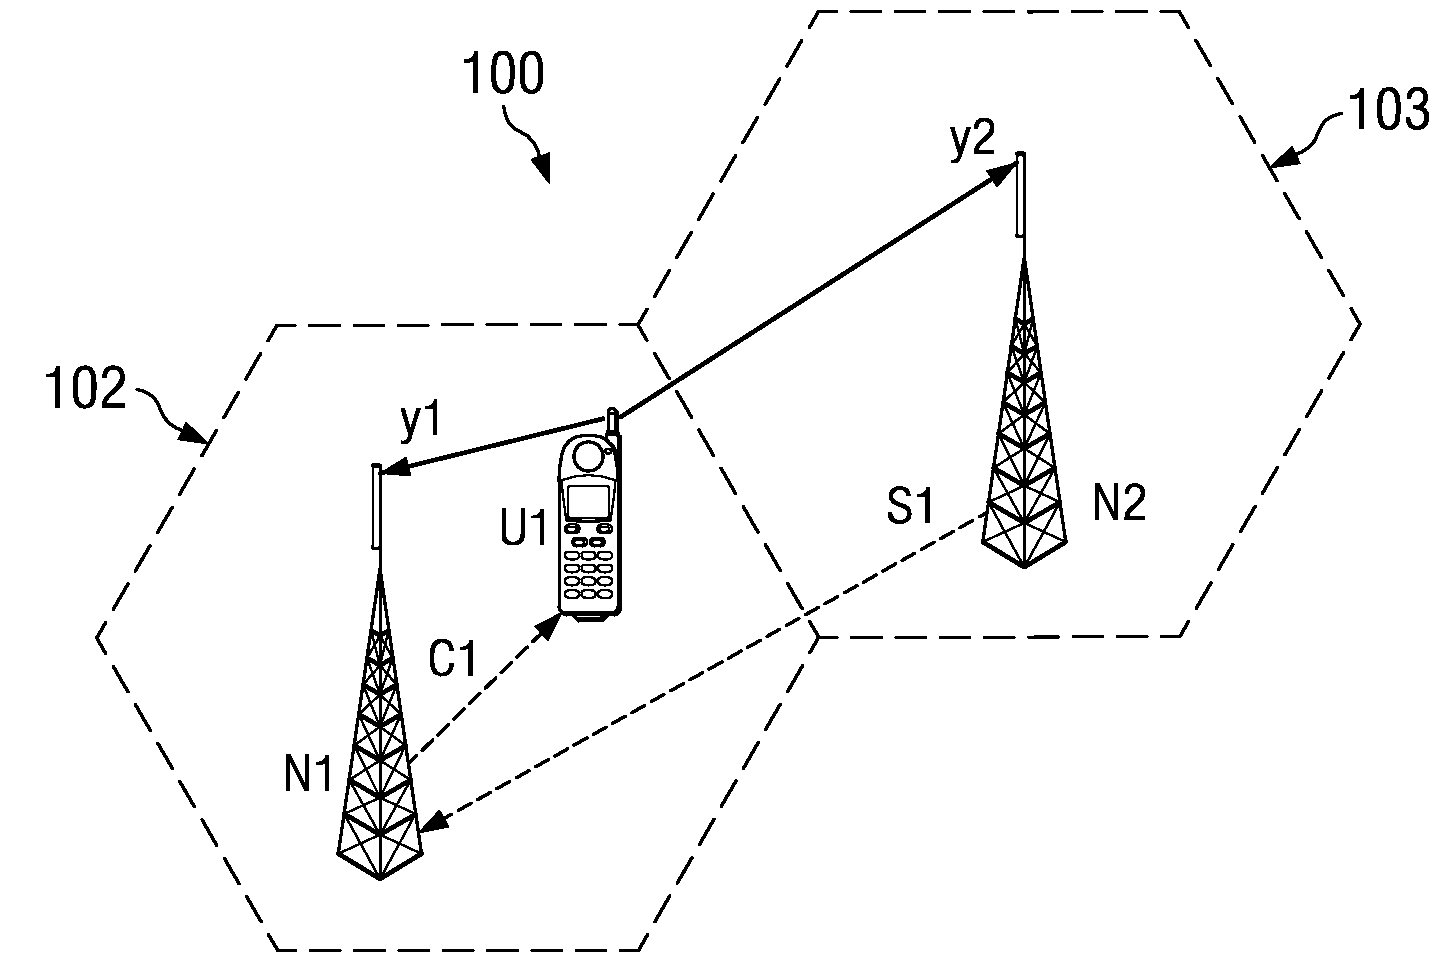 Power Settings for the Sounding Reference signal and the Scheduled Transmission in Multi-Channel Scheduled Systems